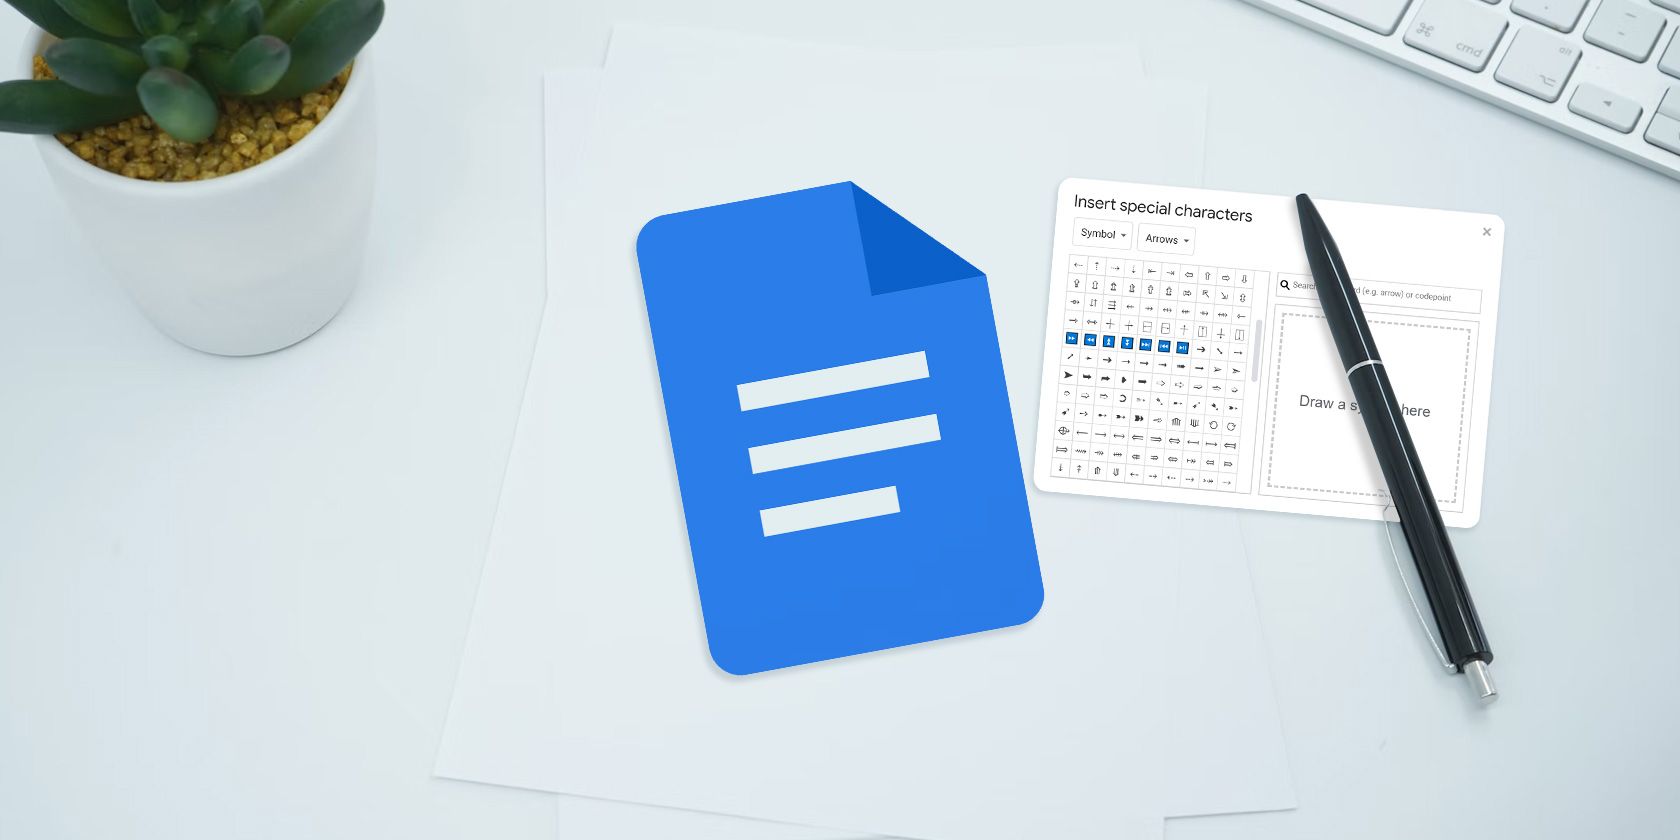 A large blue icon representing a document superimposed on a photo of a desk